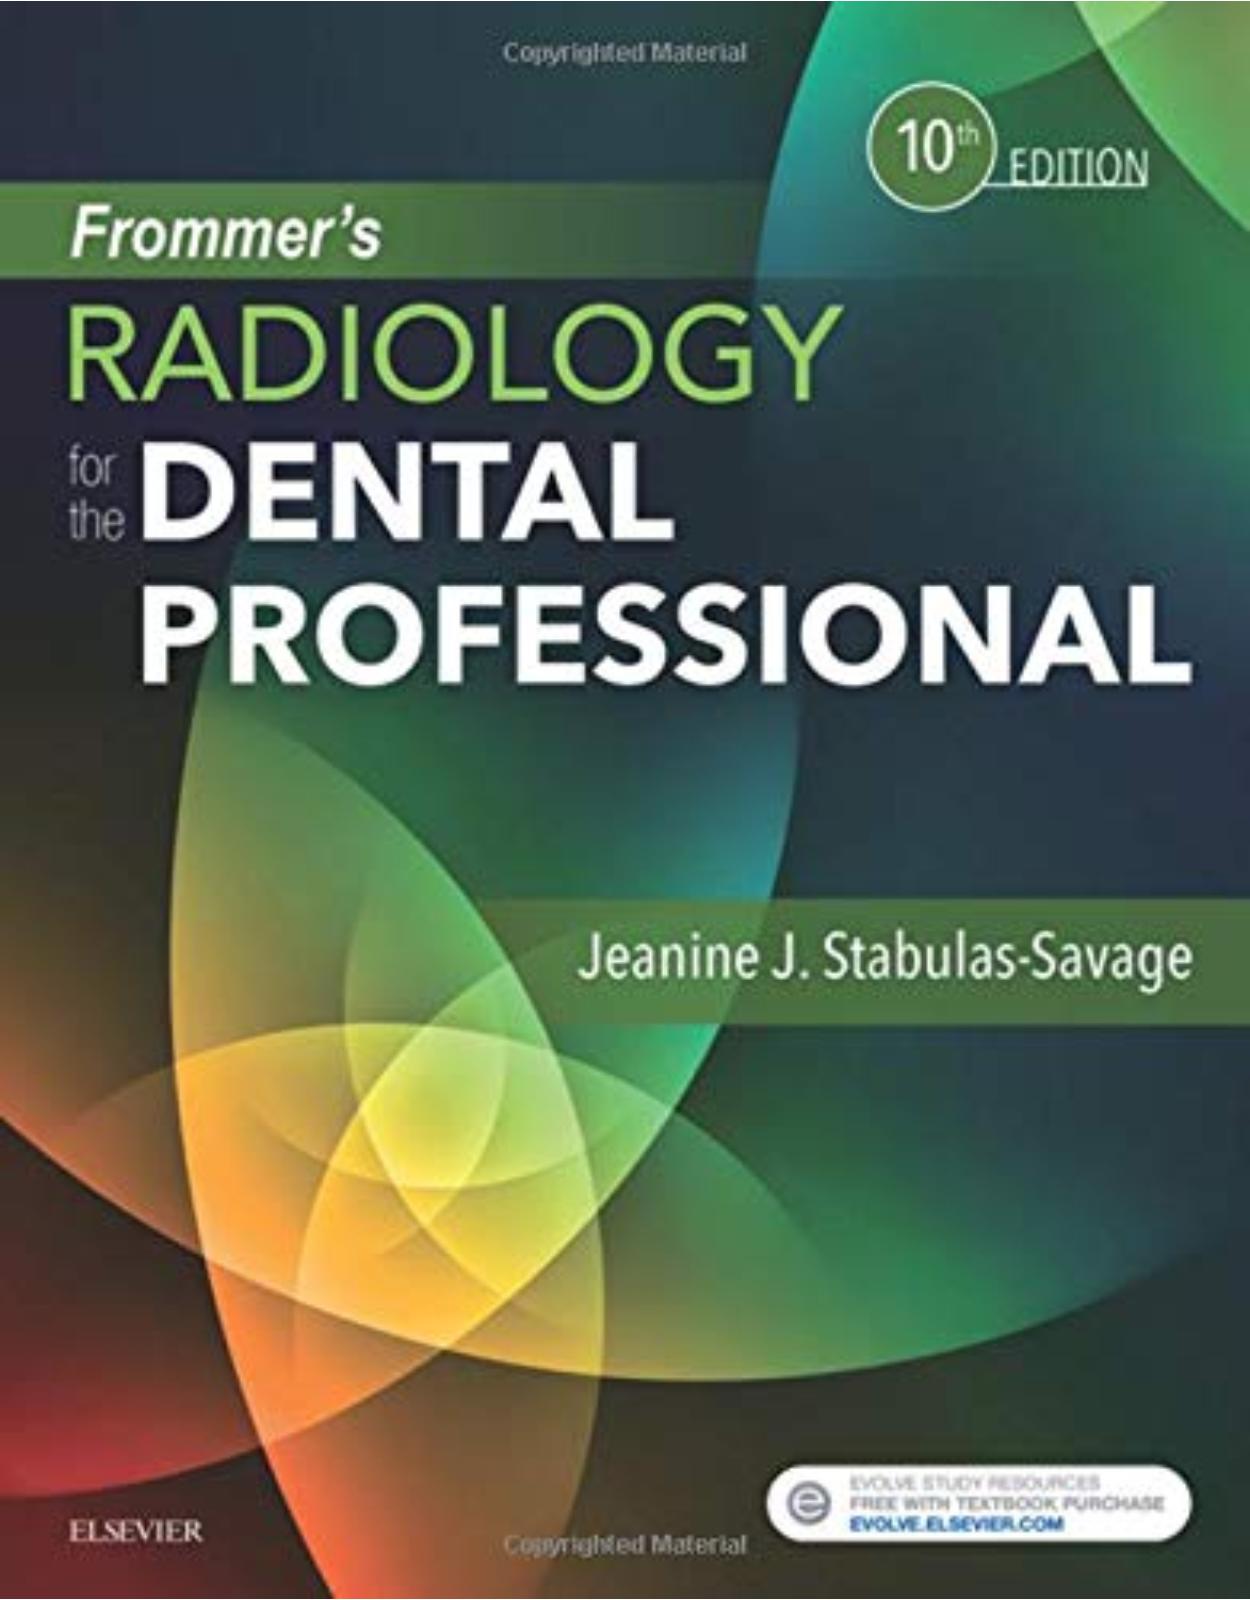 Frommer's Radiology for the Dental Professional, 10e